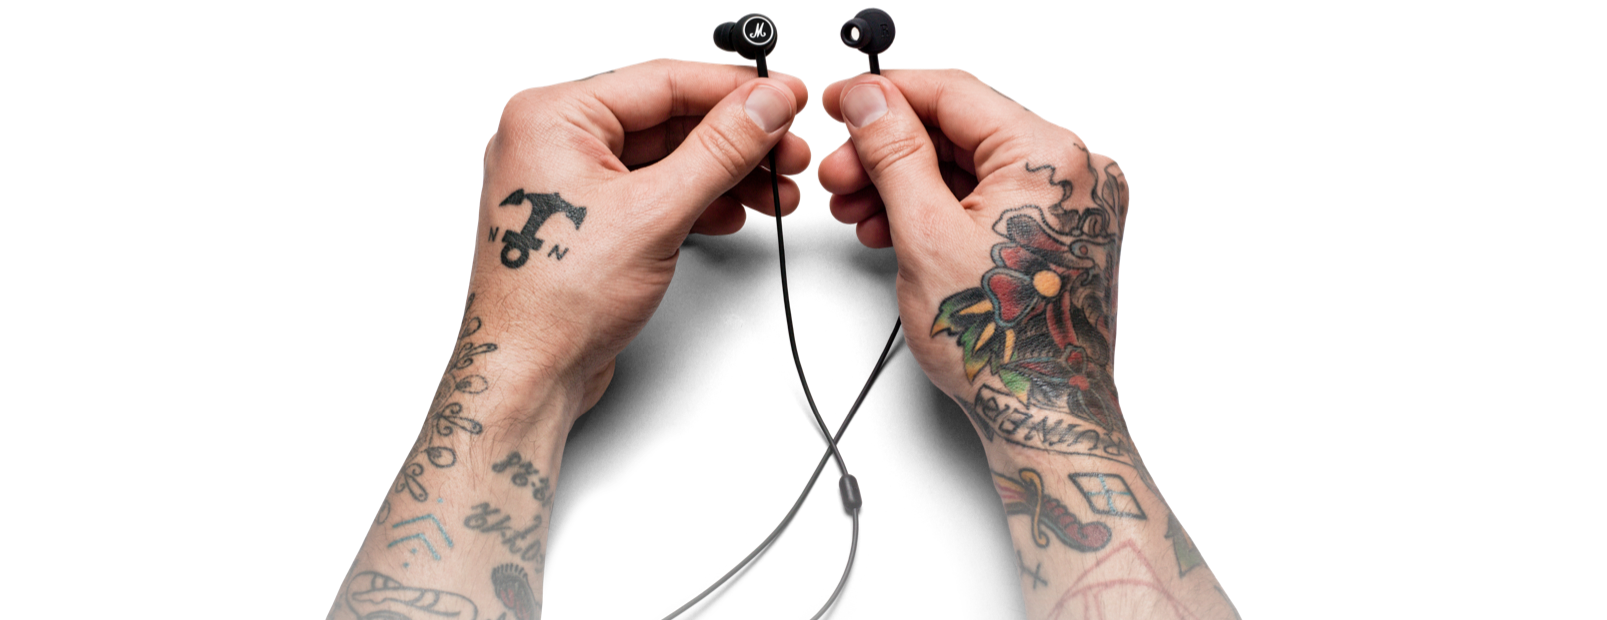 Marshall Mode In-Ear Earbuds